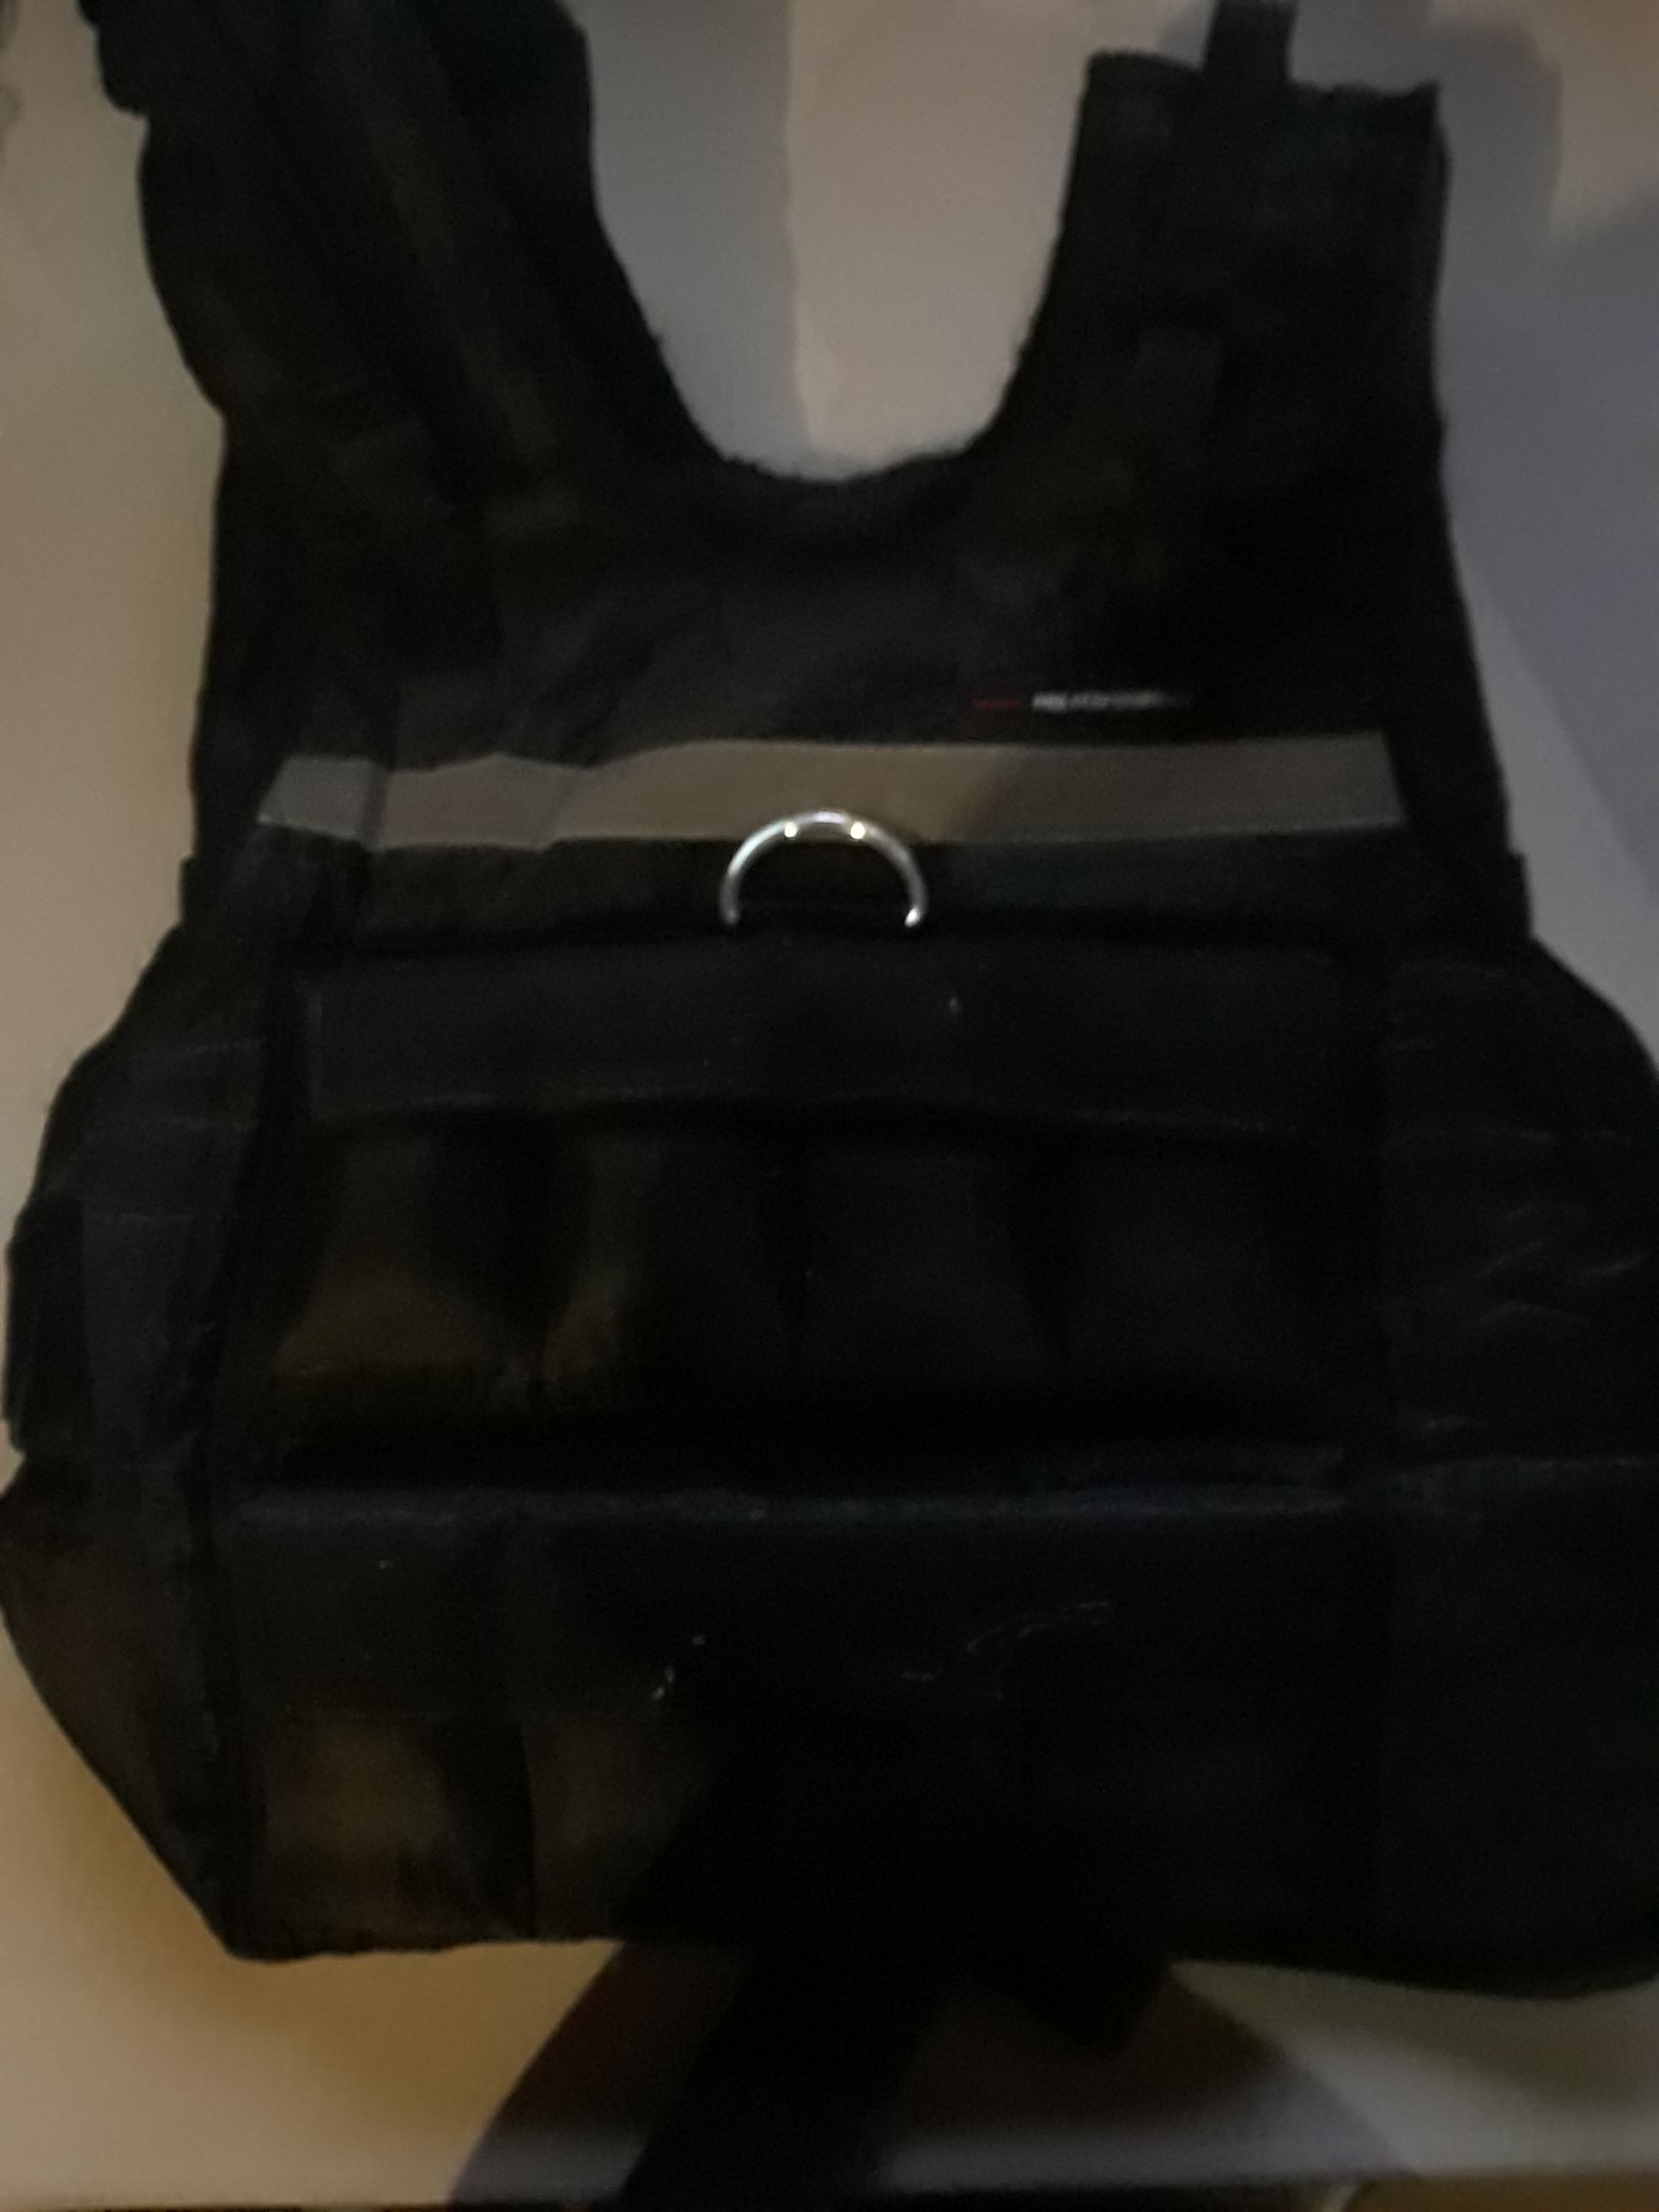 Gnc weighted vest for work out